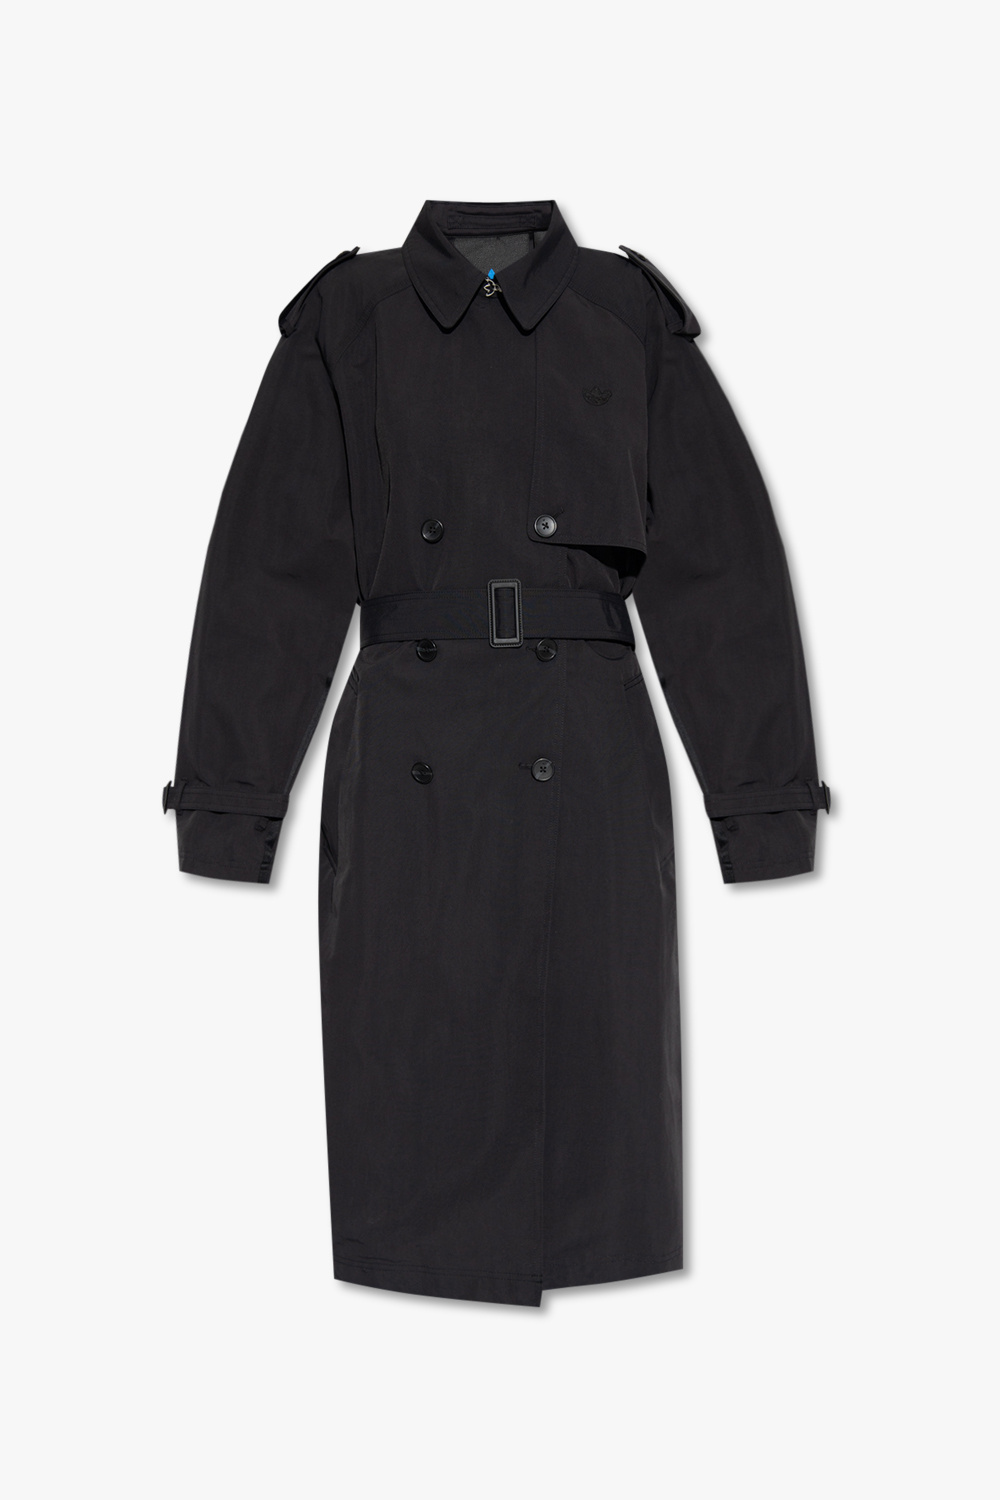 ADIDAS Originals The ‘Blue Version’ collection trench coat